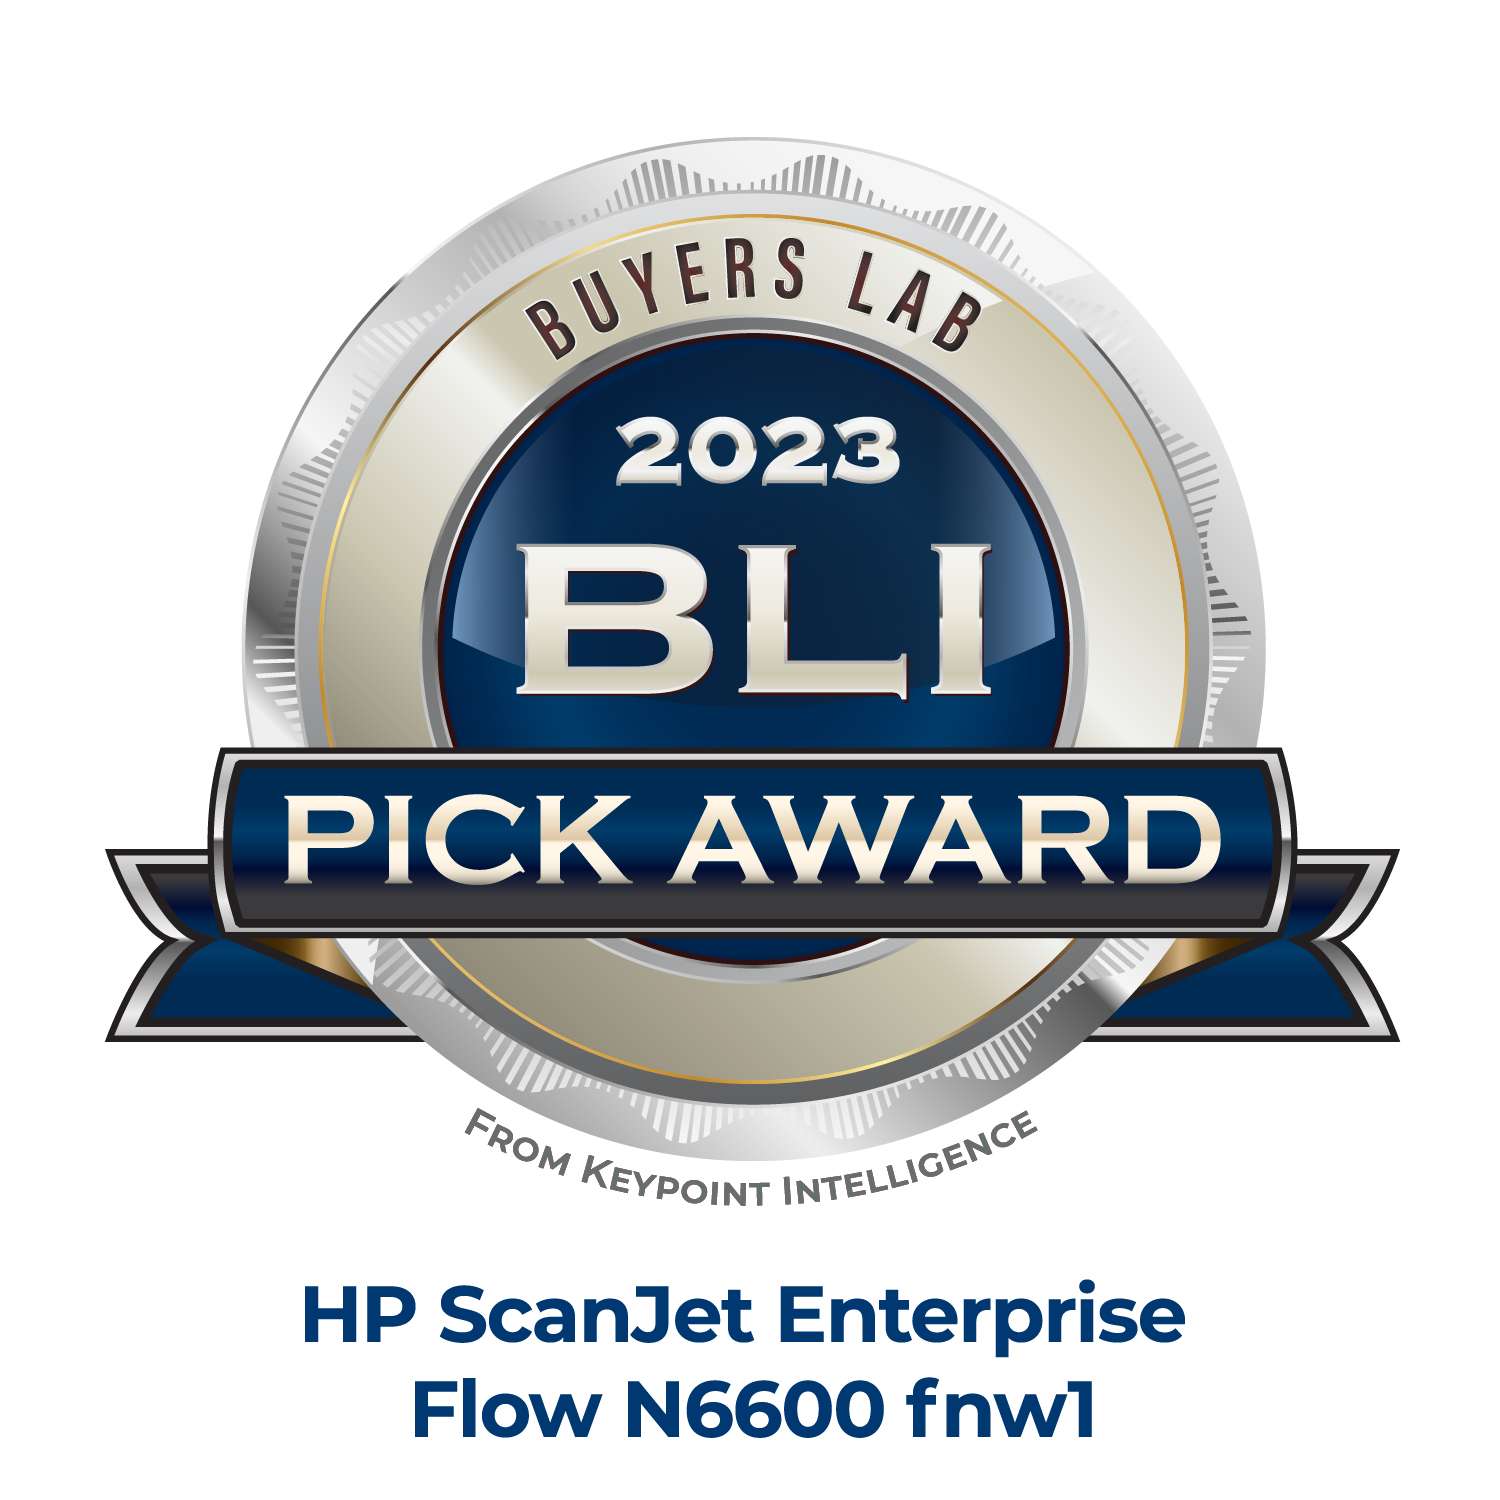 #Officeproductivity often drops when trying to integrate paper documents with digital. Reply to learn why BLI chose the @HP ScanJet Enterprise Flow as its 2023 Pick Award Winner for making scanning a breeze.